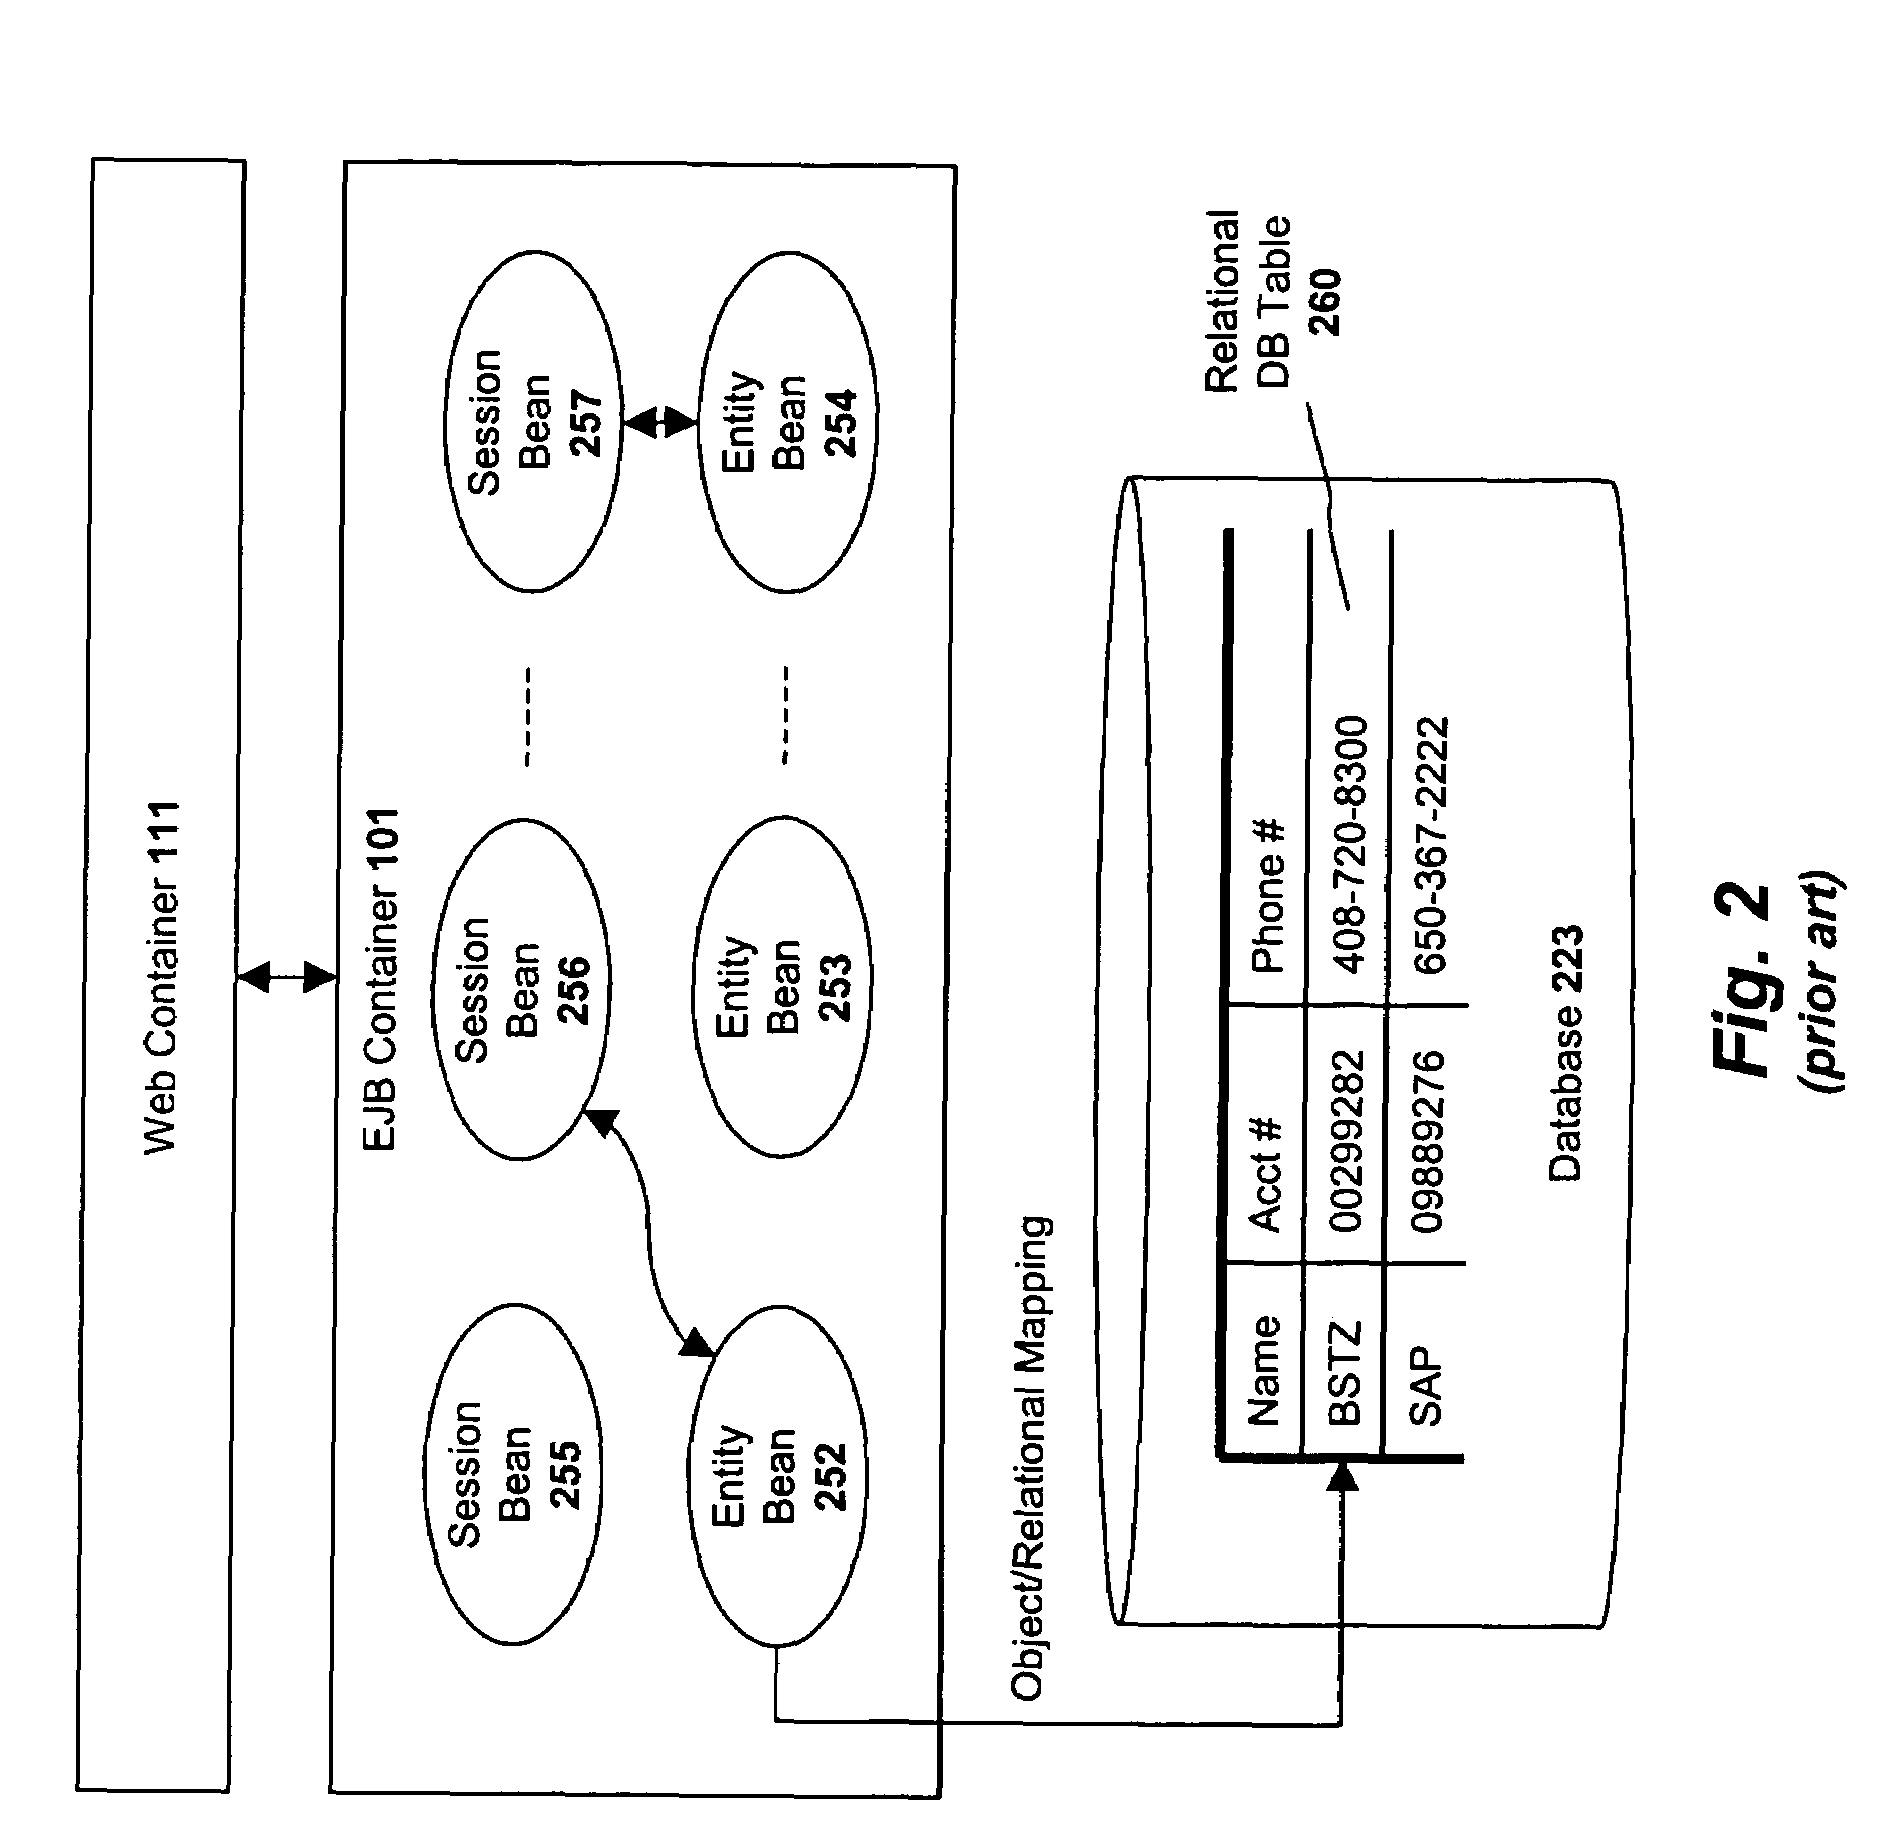 System and method for ordering a database flush sequence at transaction commit